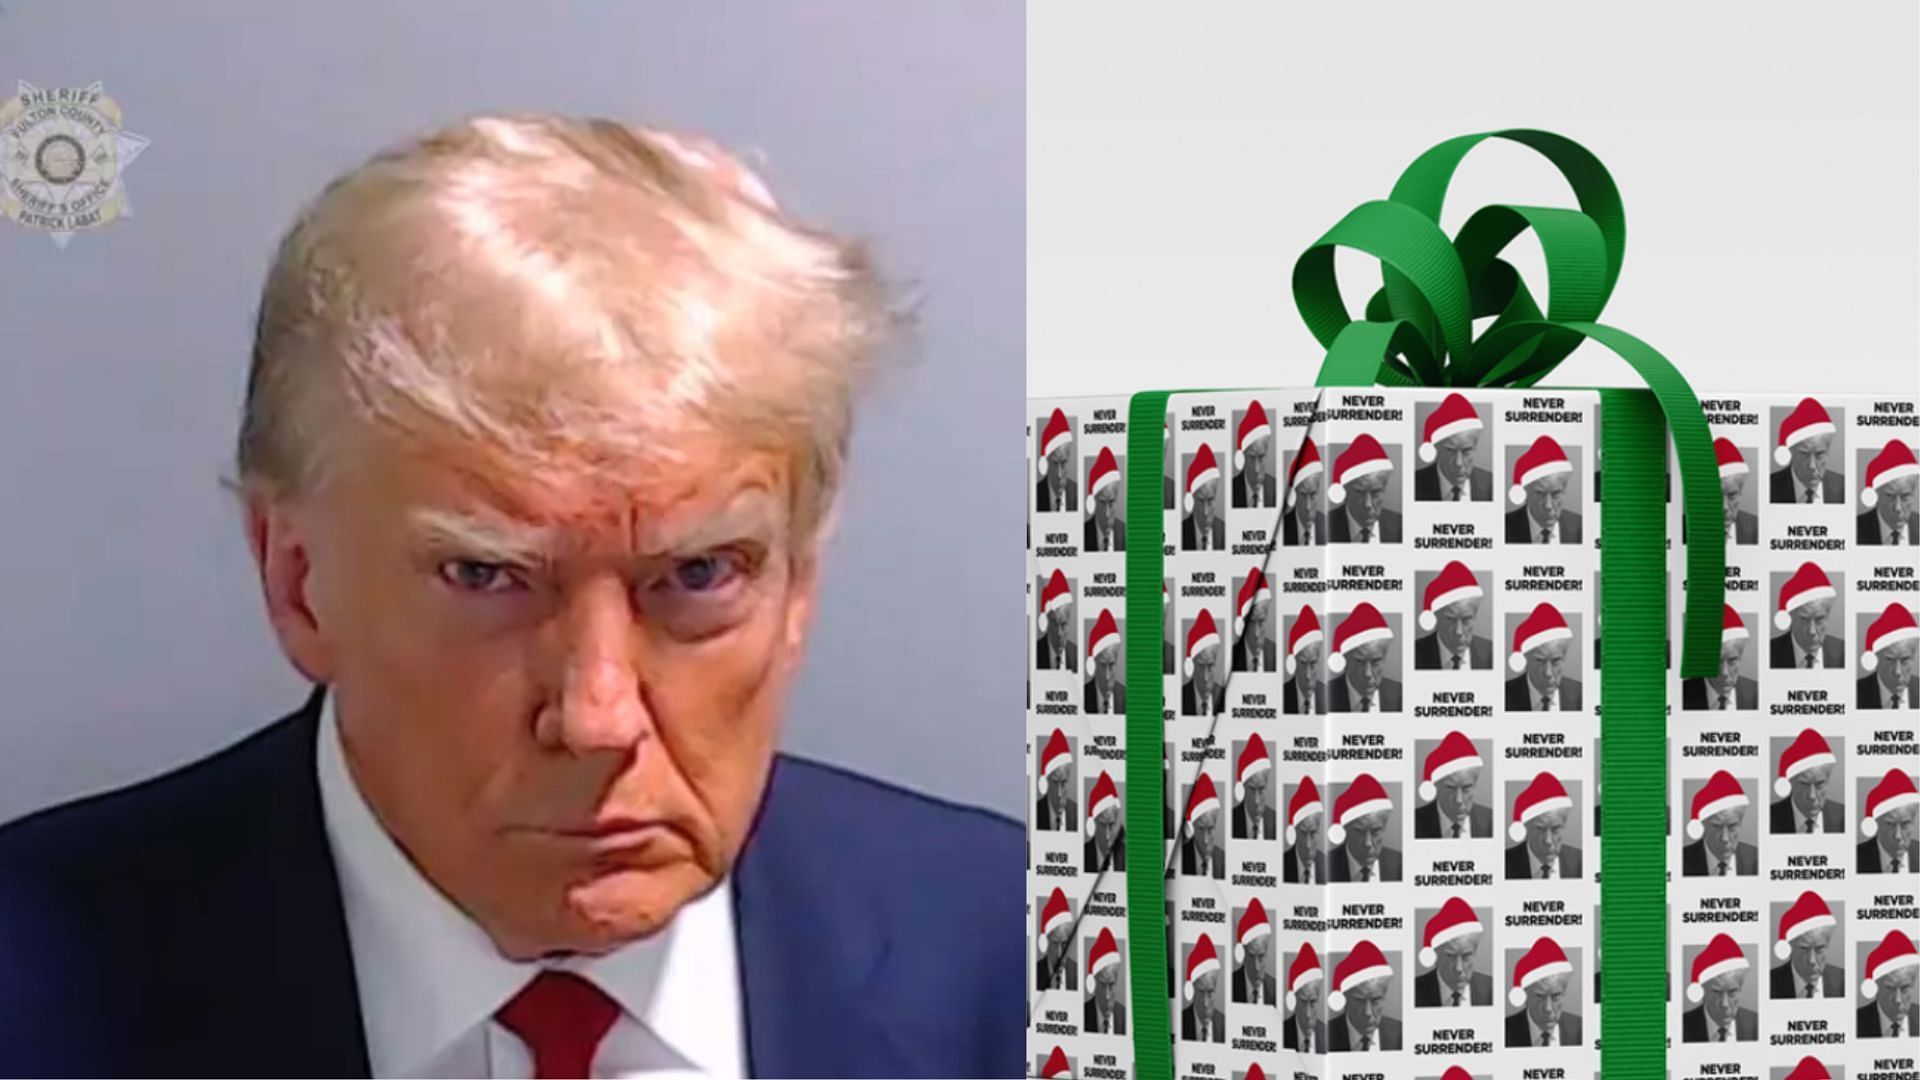 Donald Trump mugshot wrapping paper (Image via snip from X/@TeamTrump)